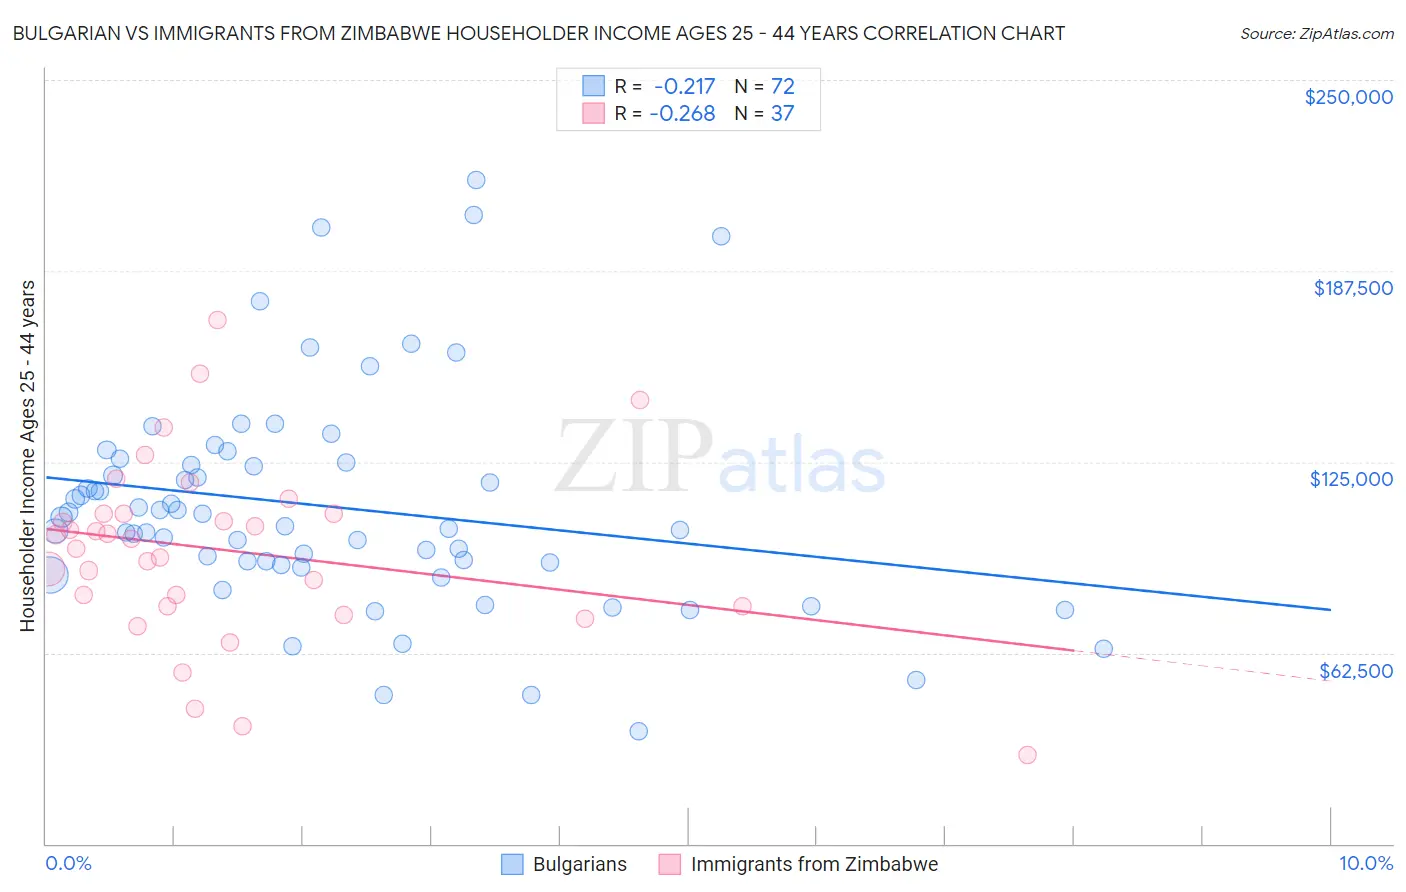 Bulgarian vs Immigrants from Zimbabwe Householder Income Ages 25 - 44 years